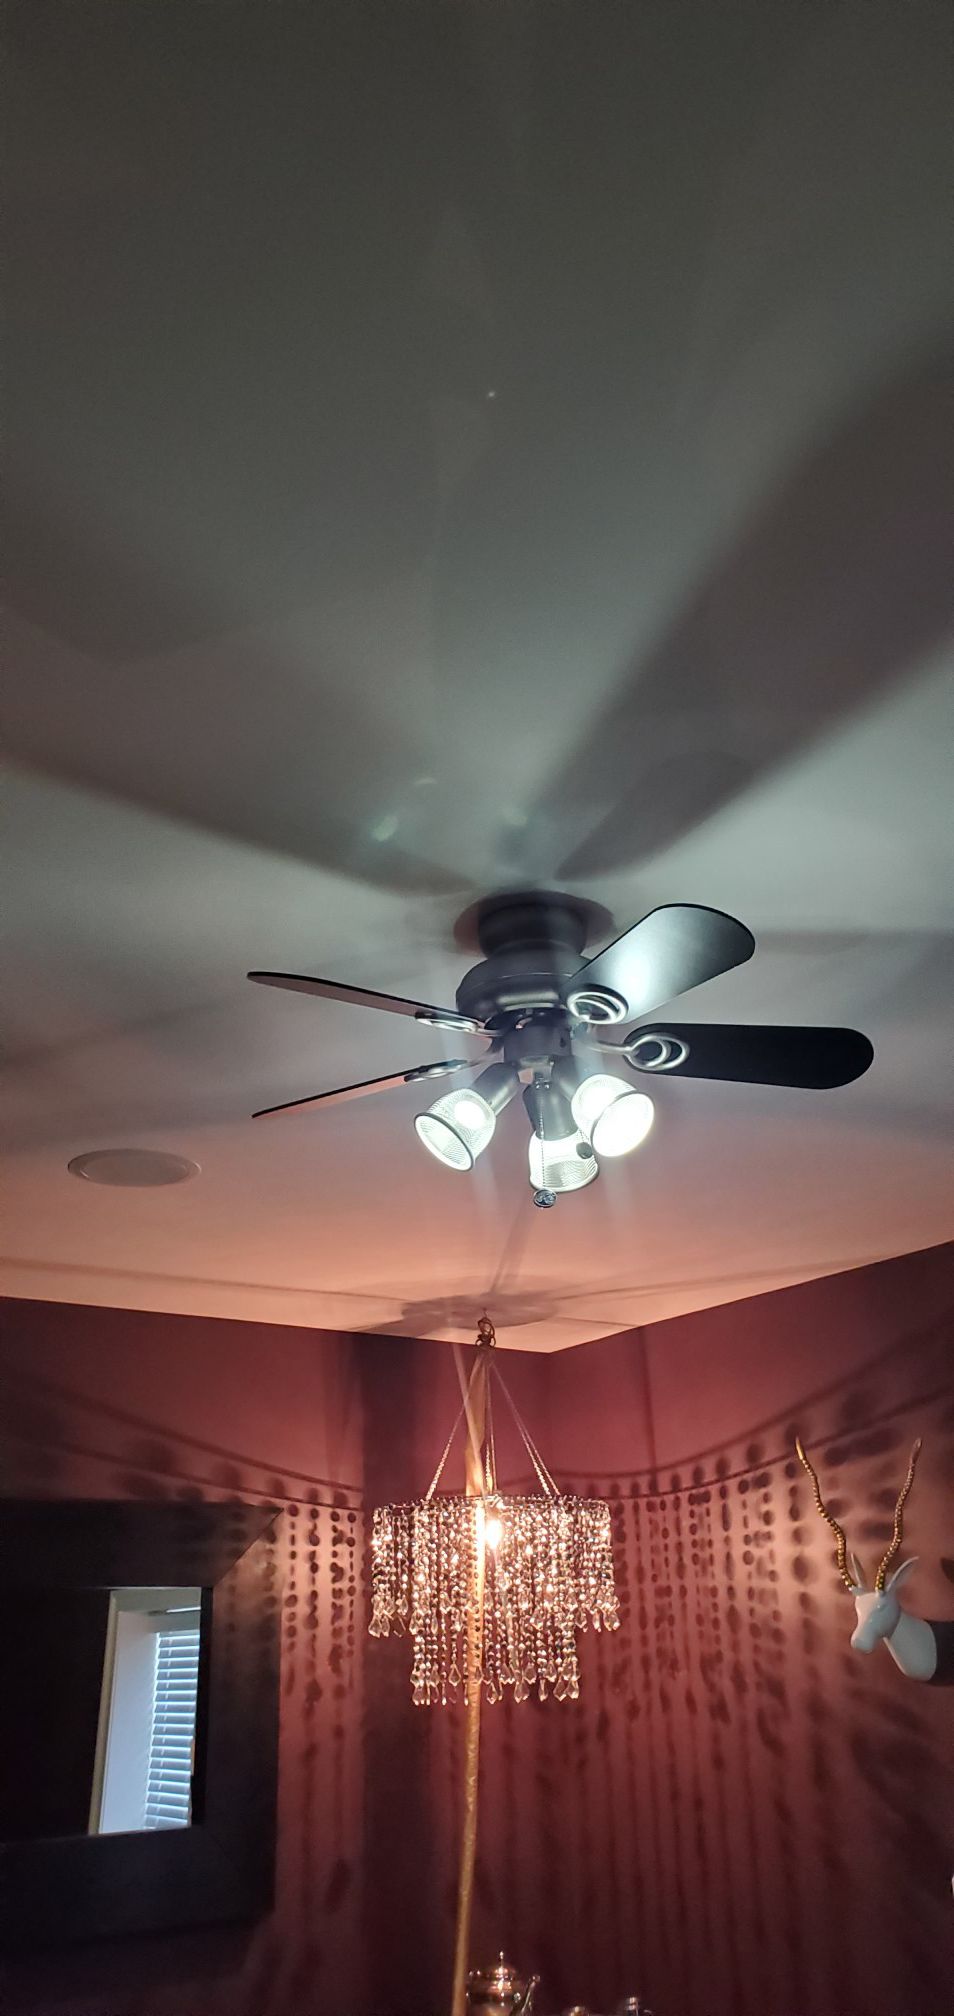 Ceiling fan and light fixture